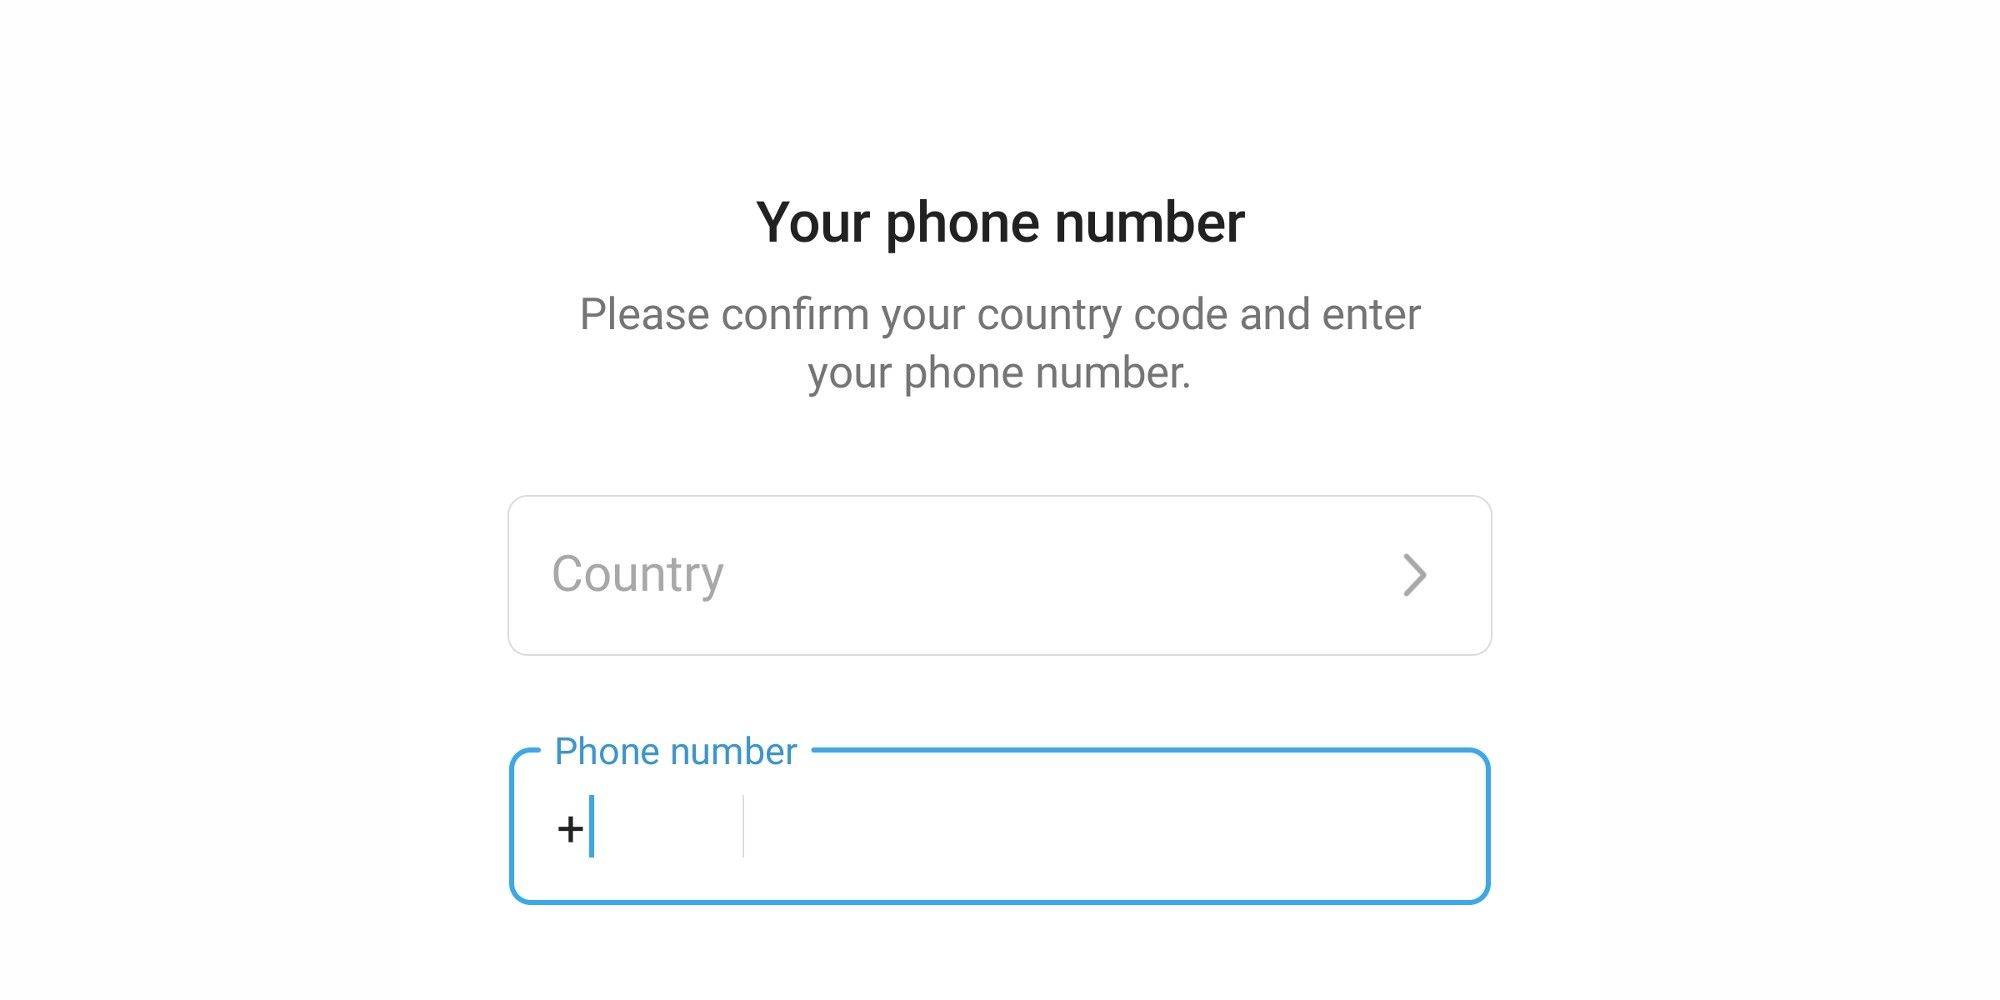 Can You Use Telegram Without A Phone Number?